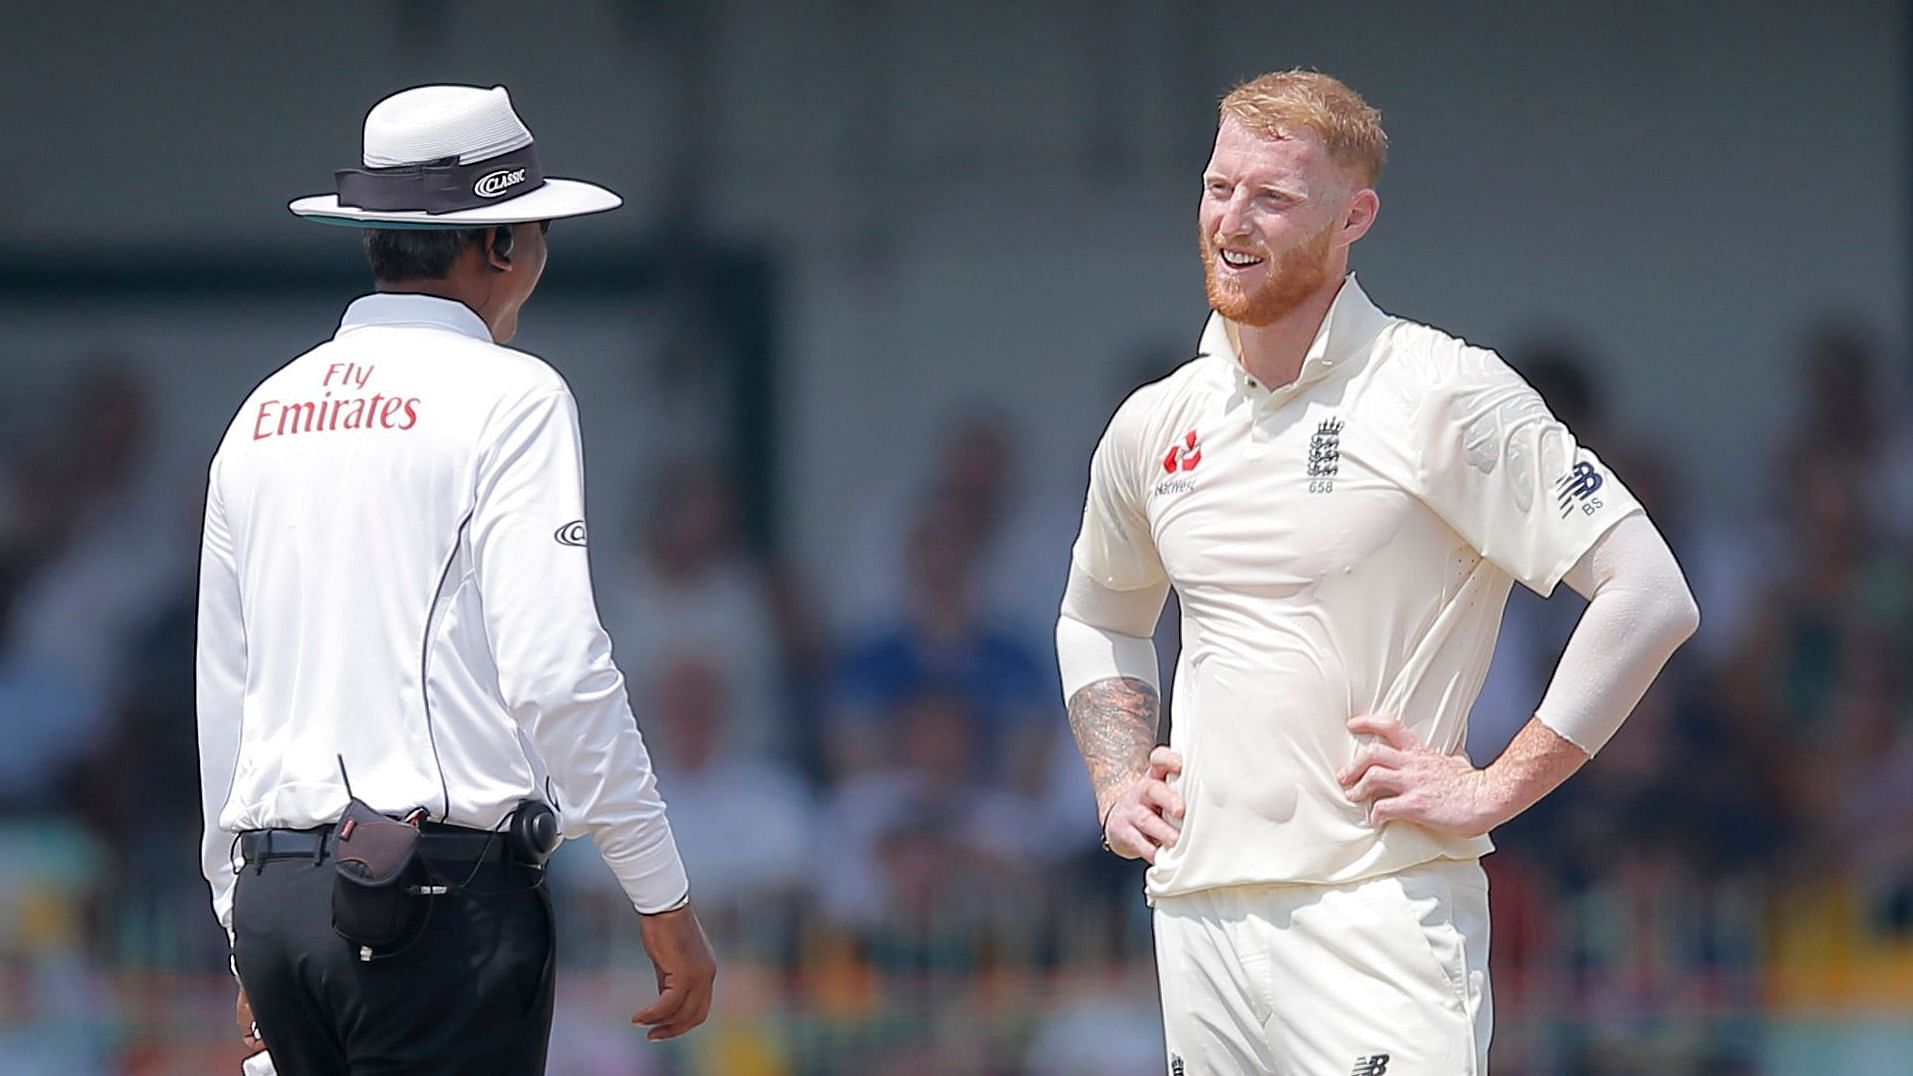 Ben Stokes will head to an internal English cricket hearing into a brawl outside a nightclub last year.